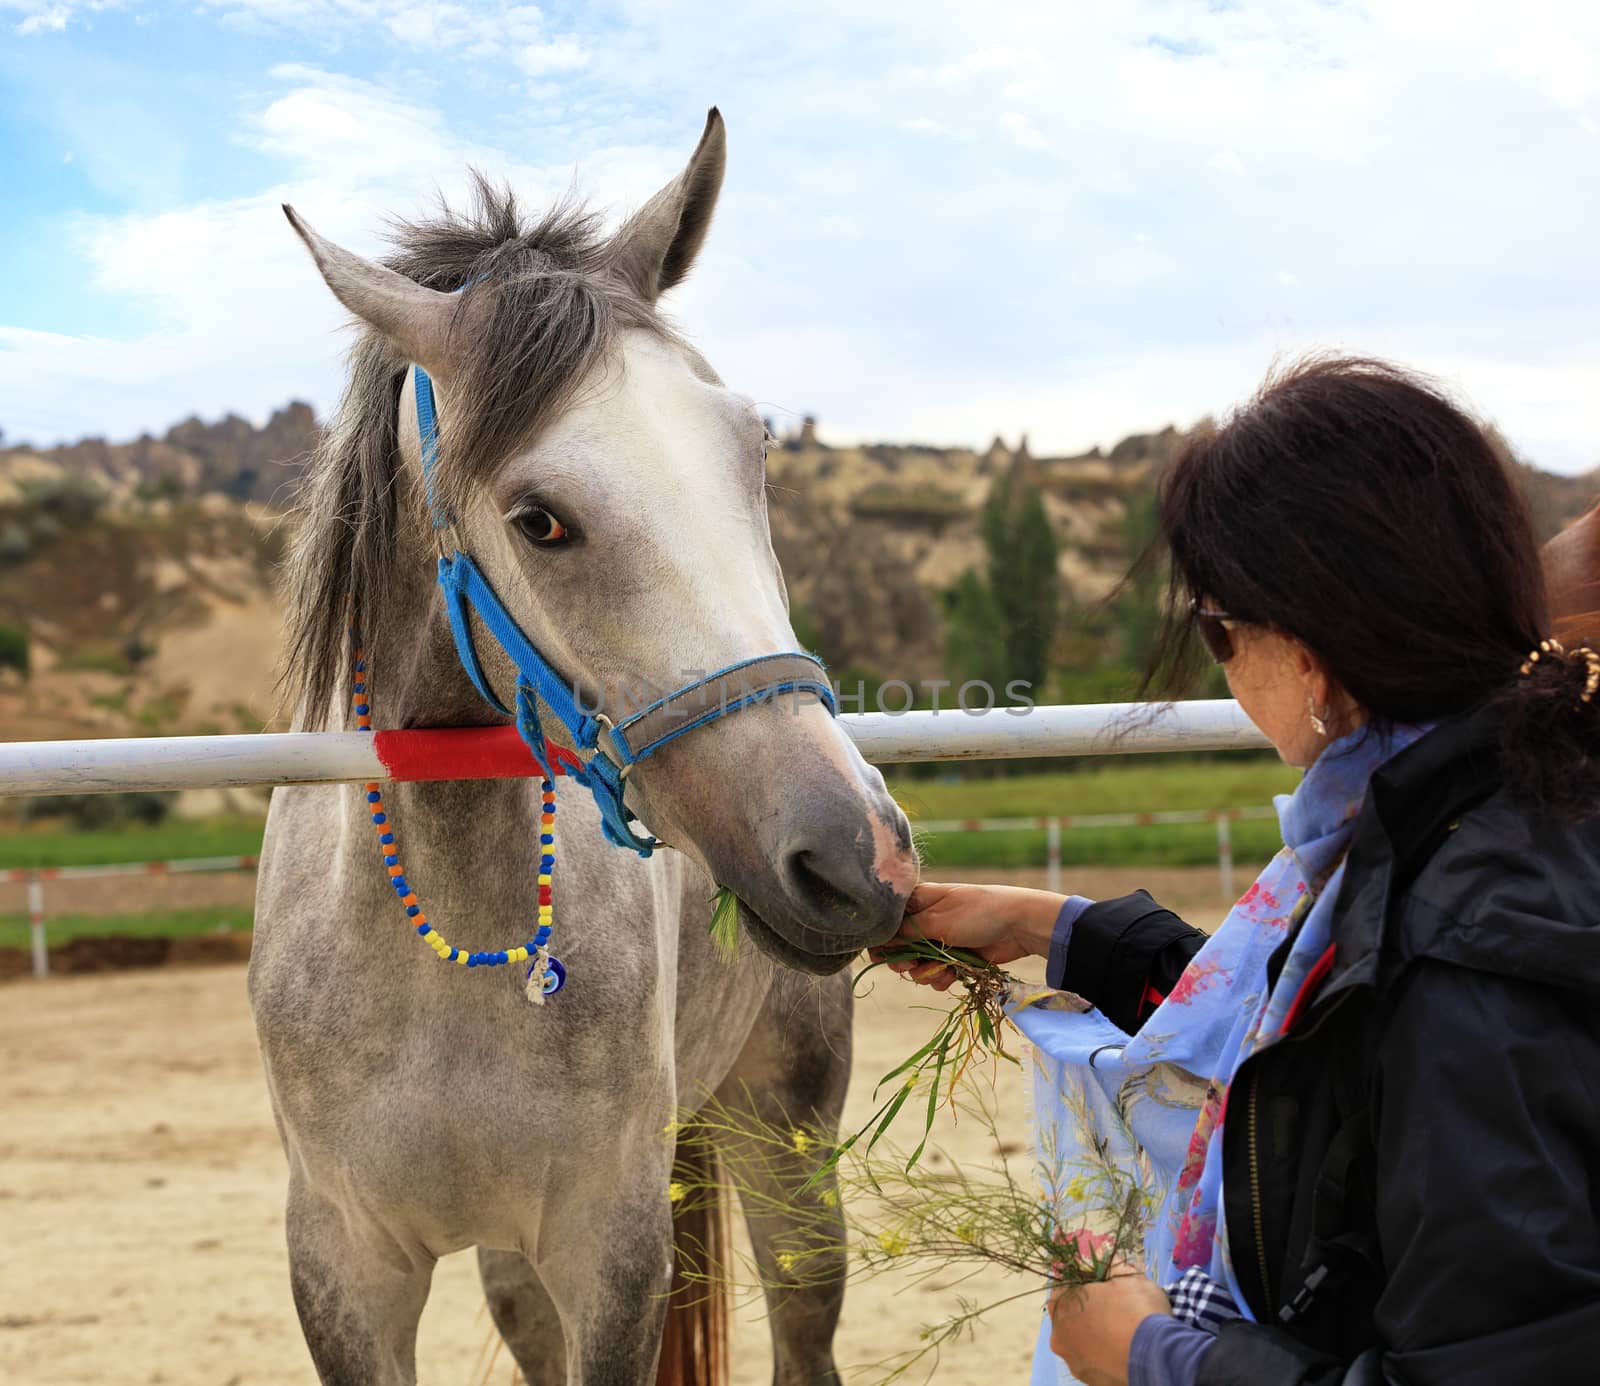 A young gray horse with a bright turquoise bridle and round colorful beads around the neck stands in the horse pen and eats green grass from the hands of the lady